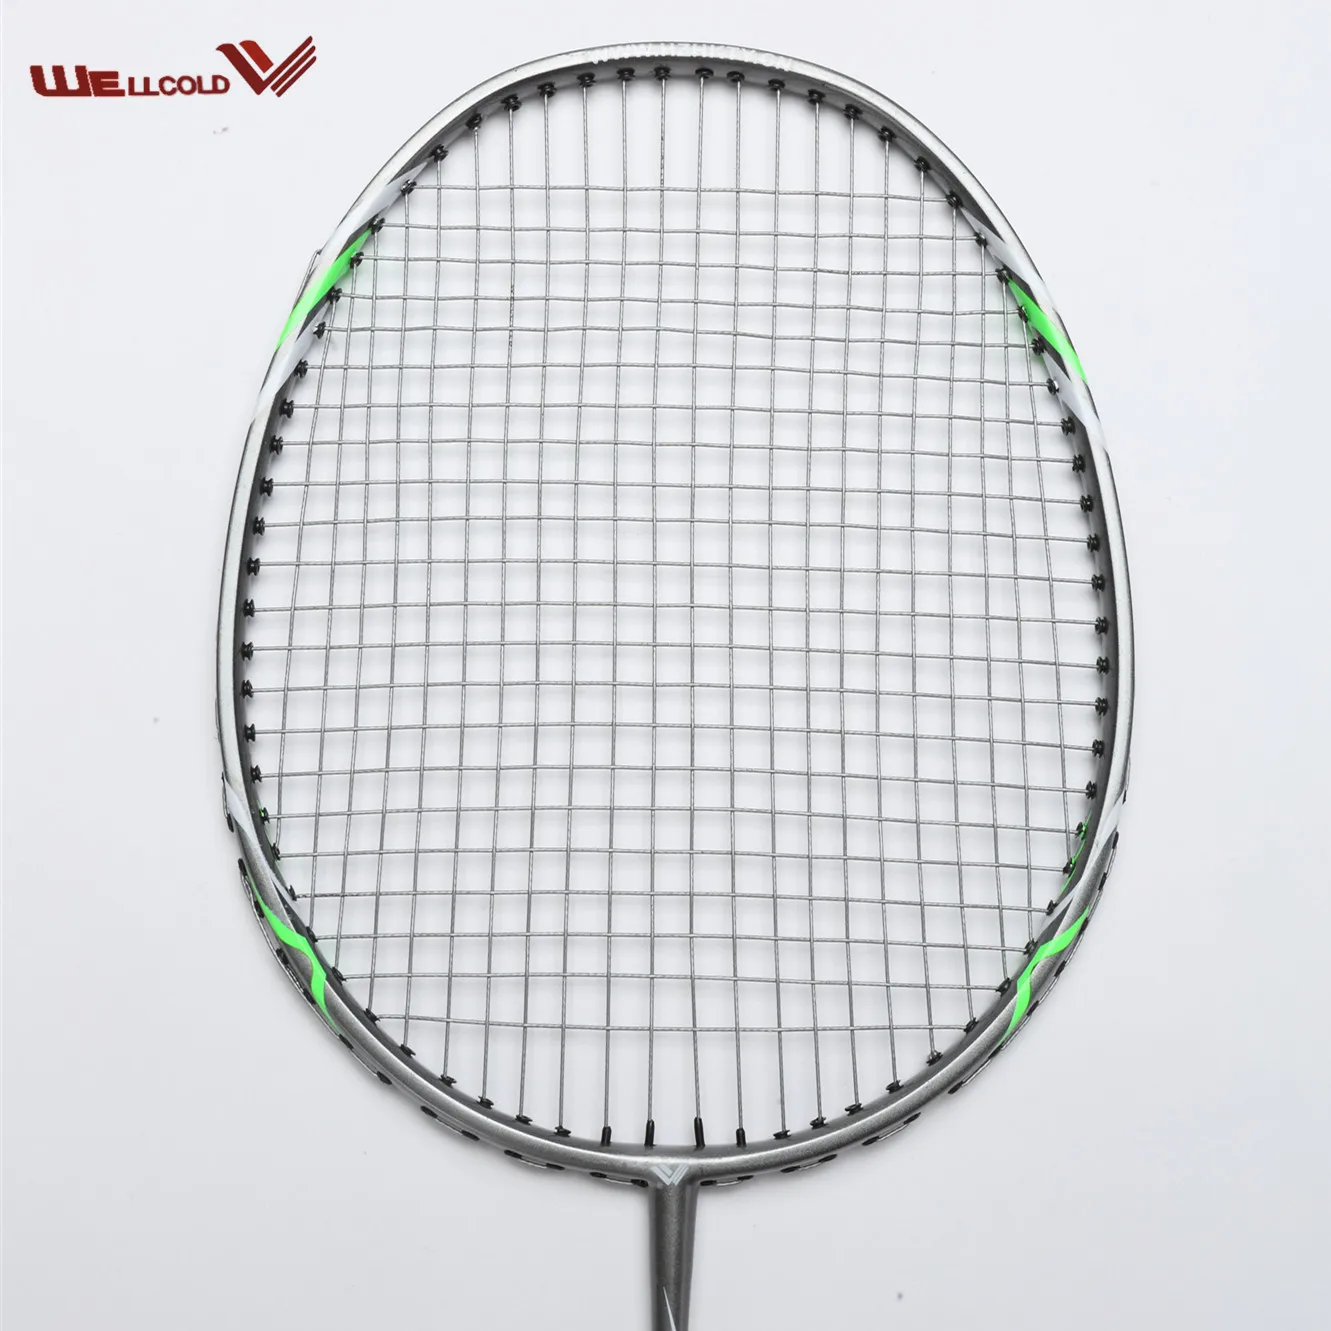 
Wellcold low price good rigidity fixed badminton bag racket for wholesale 